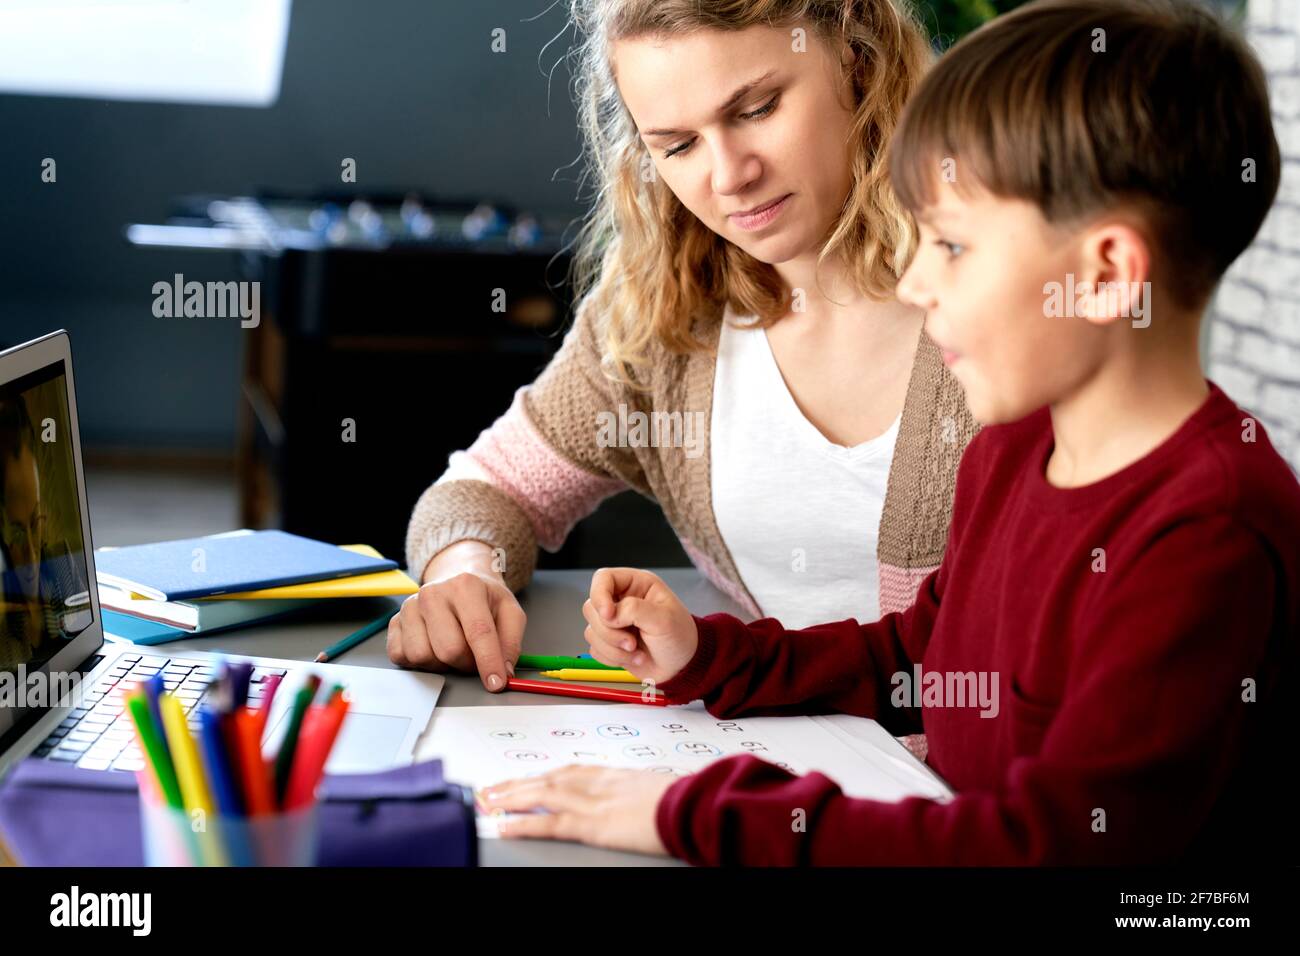 Mother assists her son while studying remotely Stock Photo